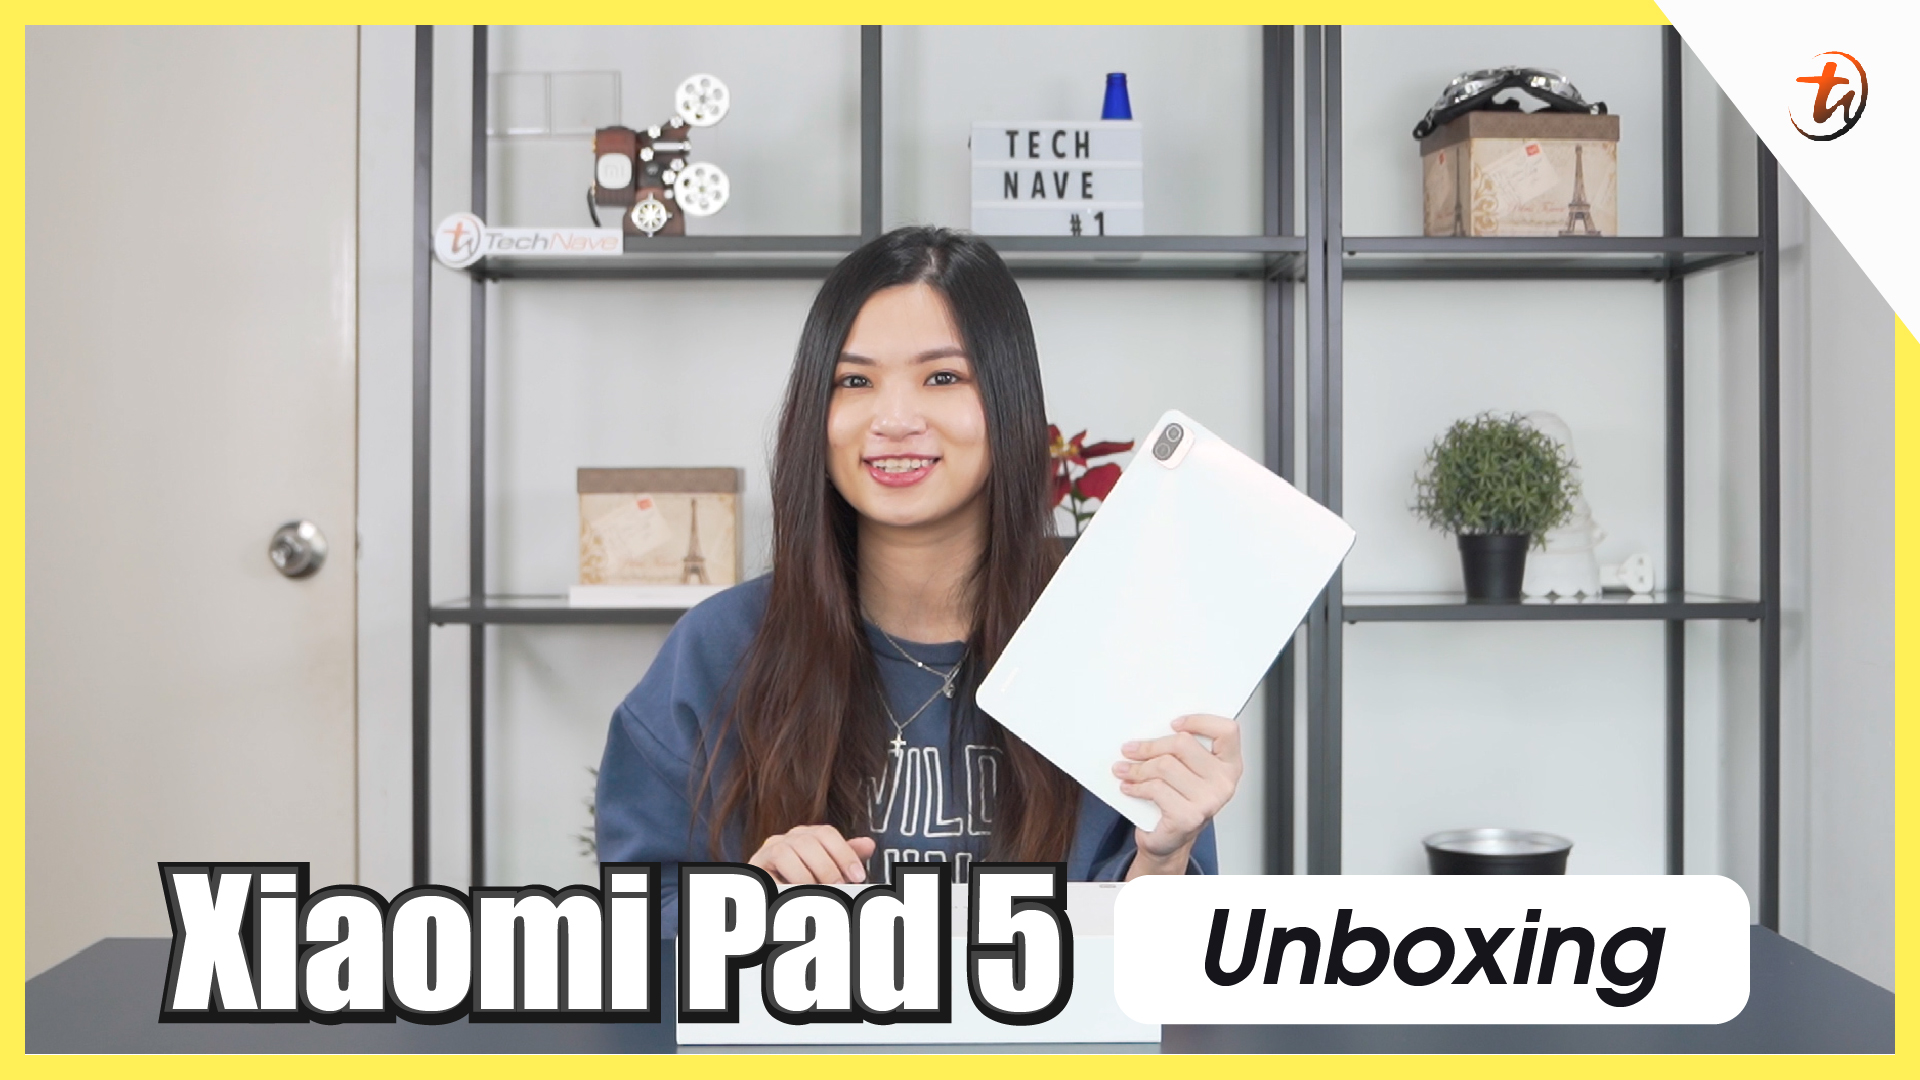 Xiaomi Pad 5 - A sleek and slim tablet | TechNave Unboxing and Hands-On Video